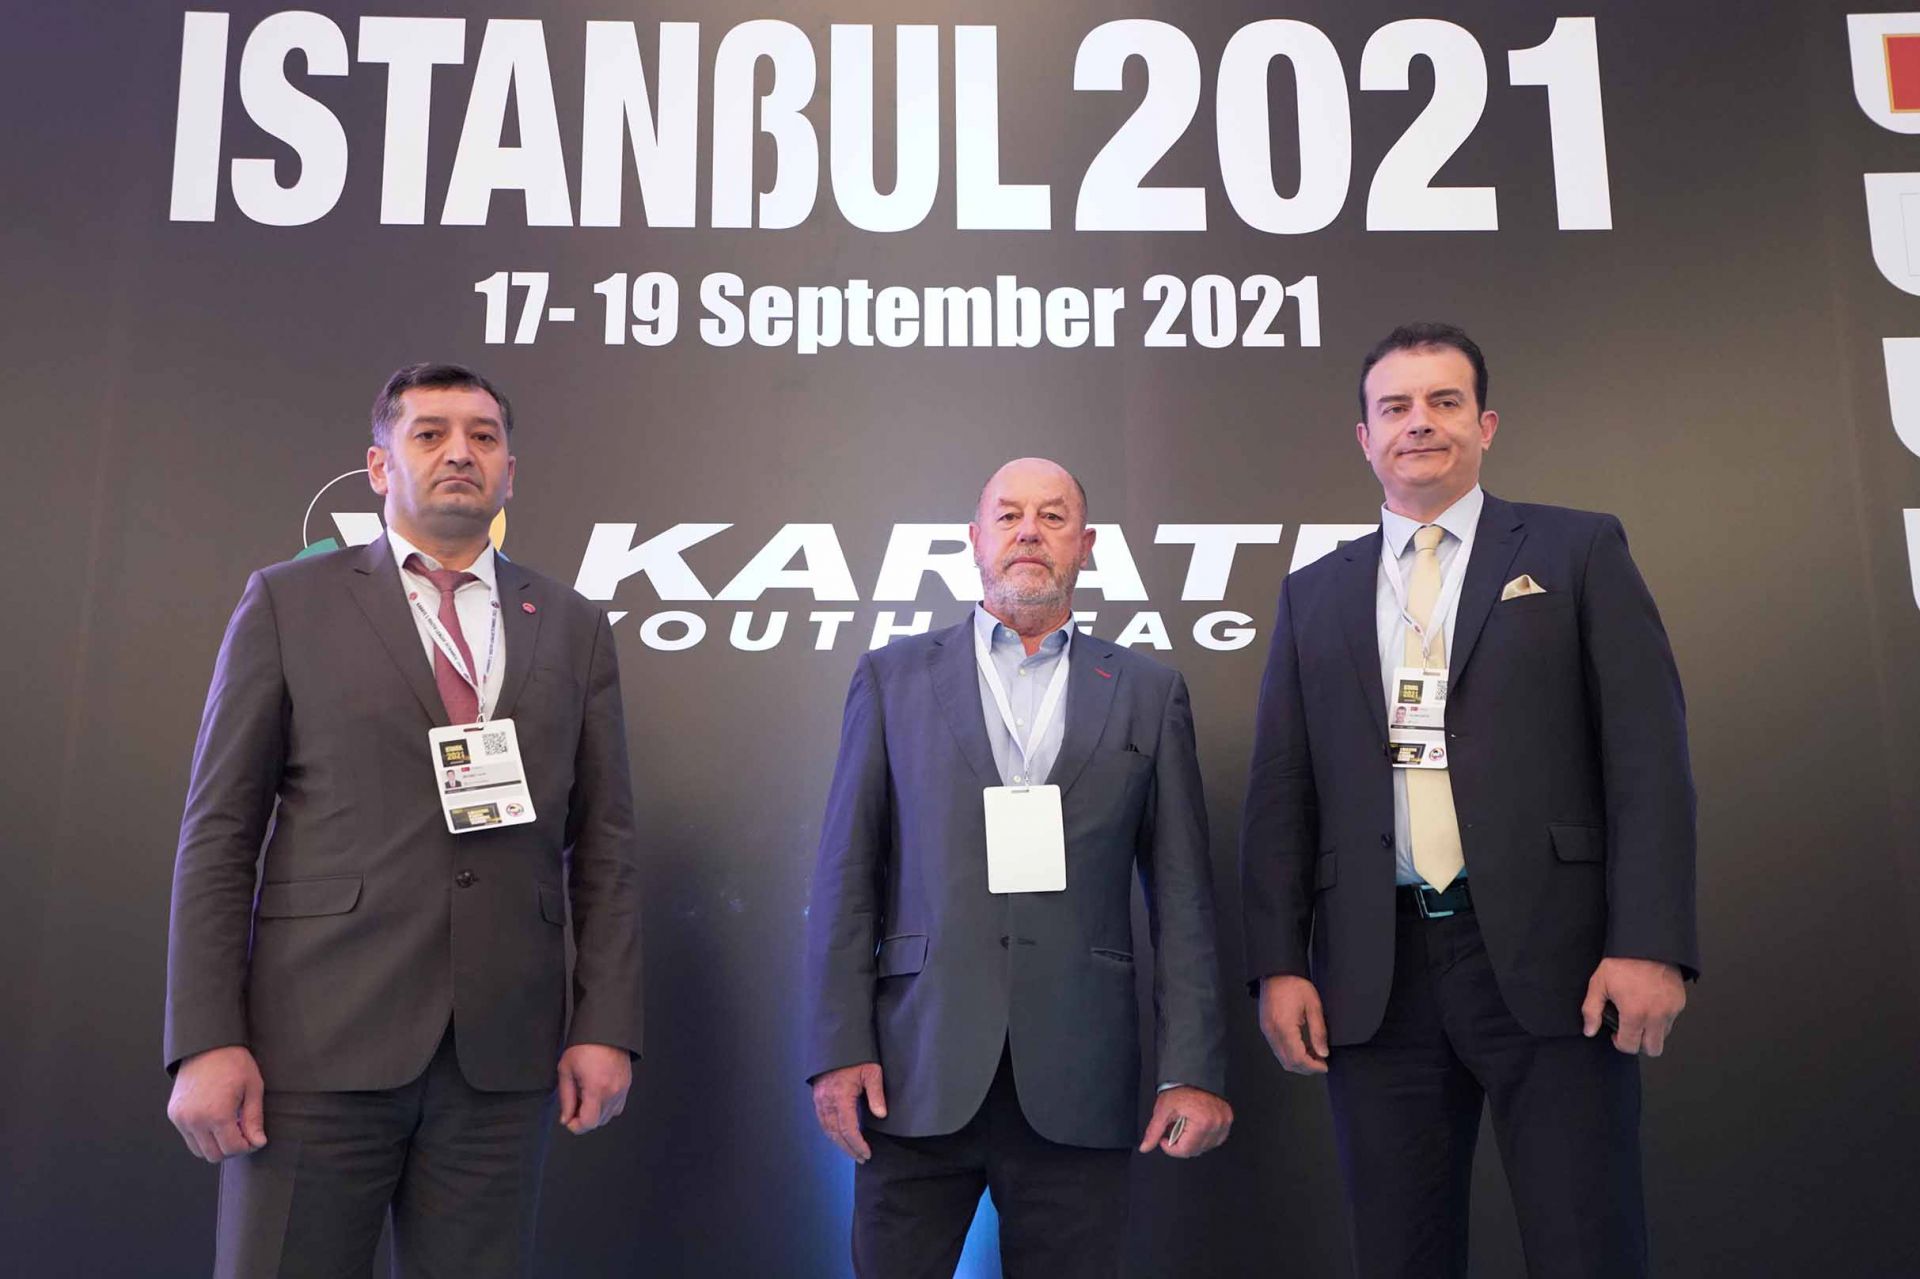 WKF President highlights success of Karate 1 Youth League at event in Istanbul